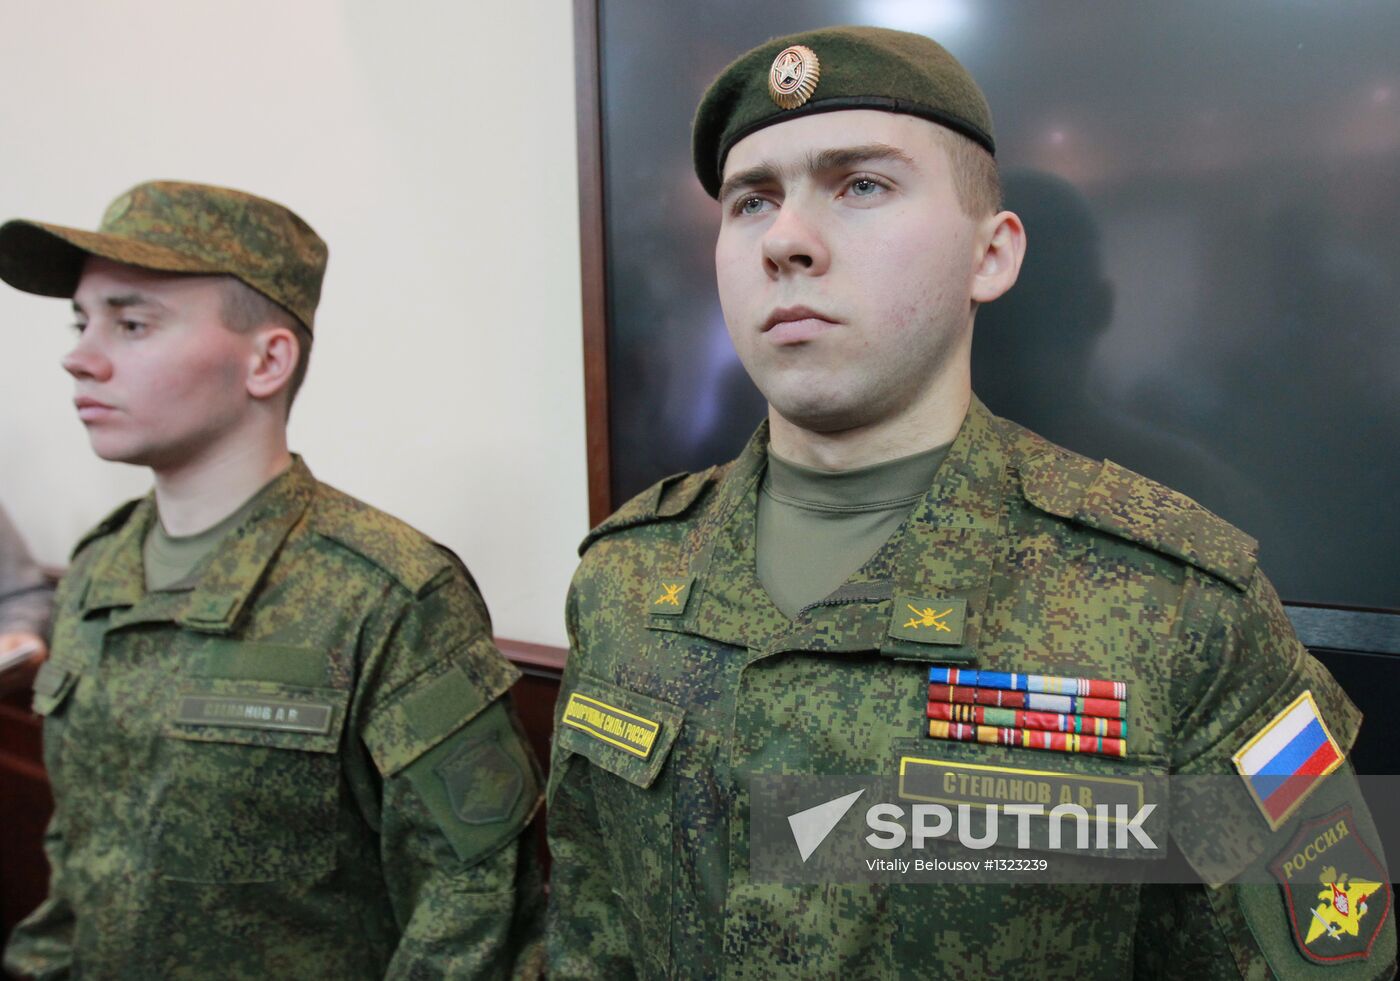 Presentation of new field uniform for the military